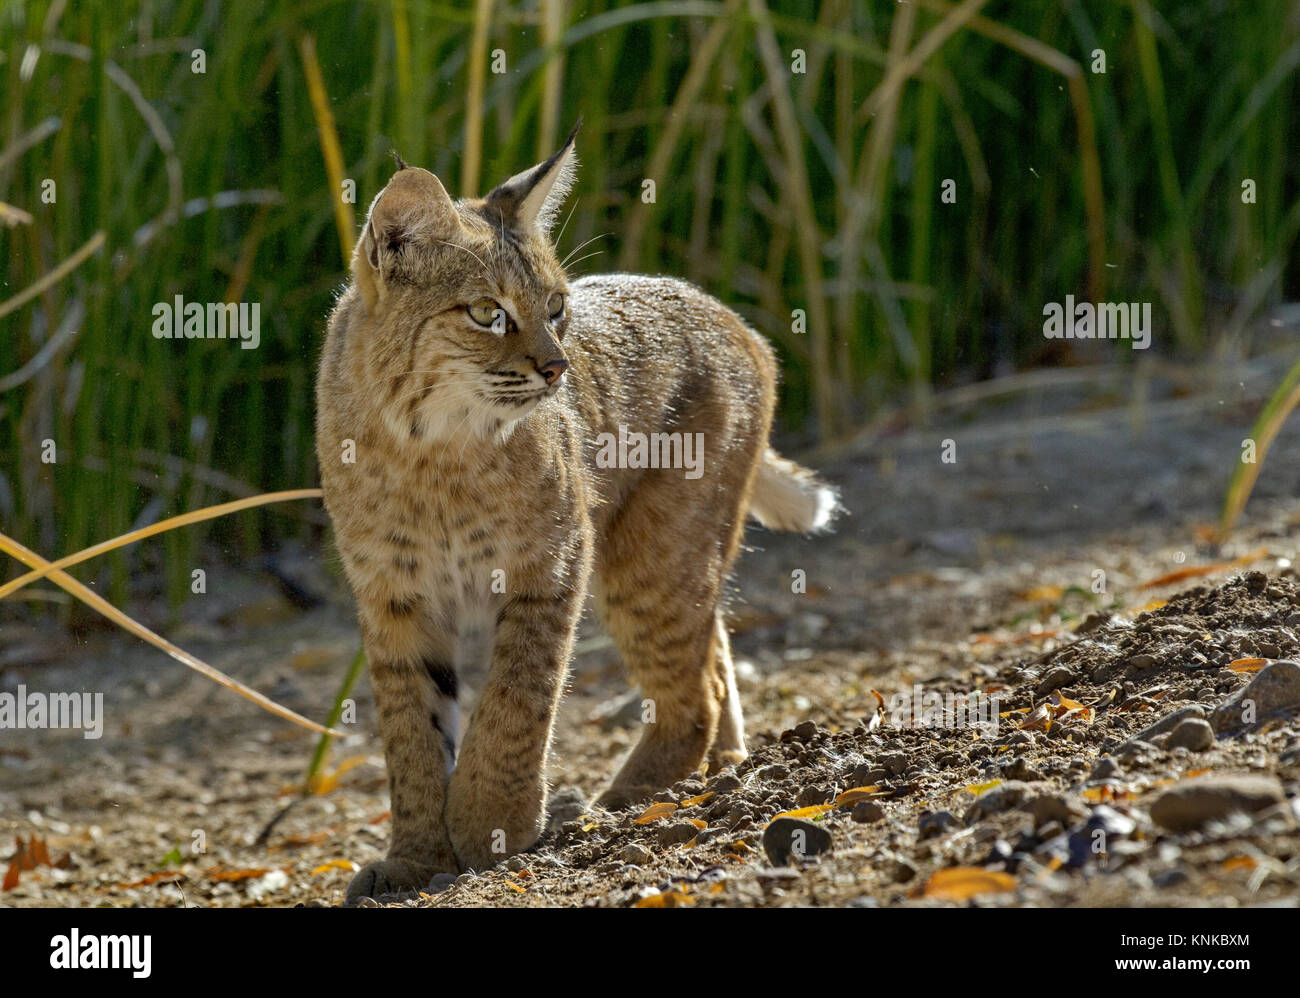 Beautiful wild bobcat pivots and shifts attention with wide, golden eyes.  Location is Sweetwater Wetlands in Tucson, Arizona, in Sonoran Desert. Stock Photo